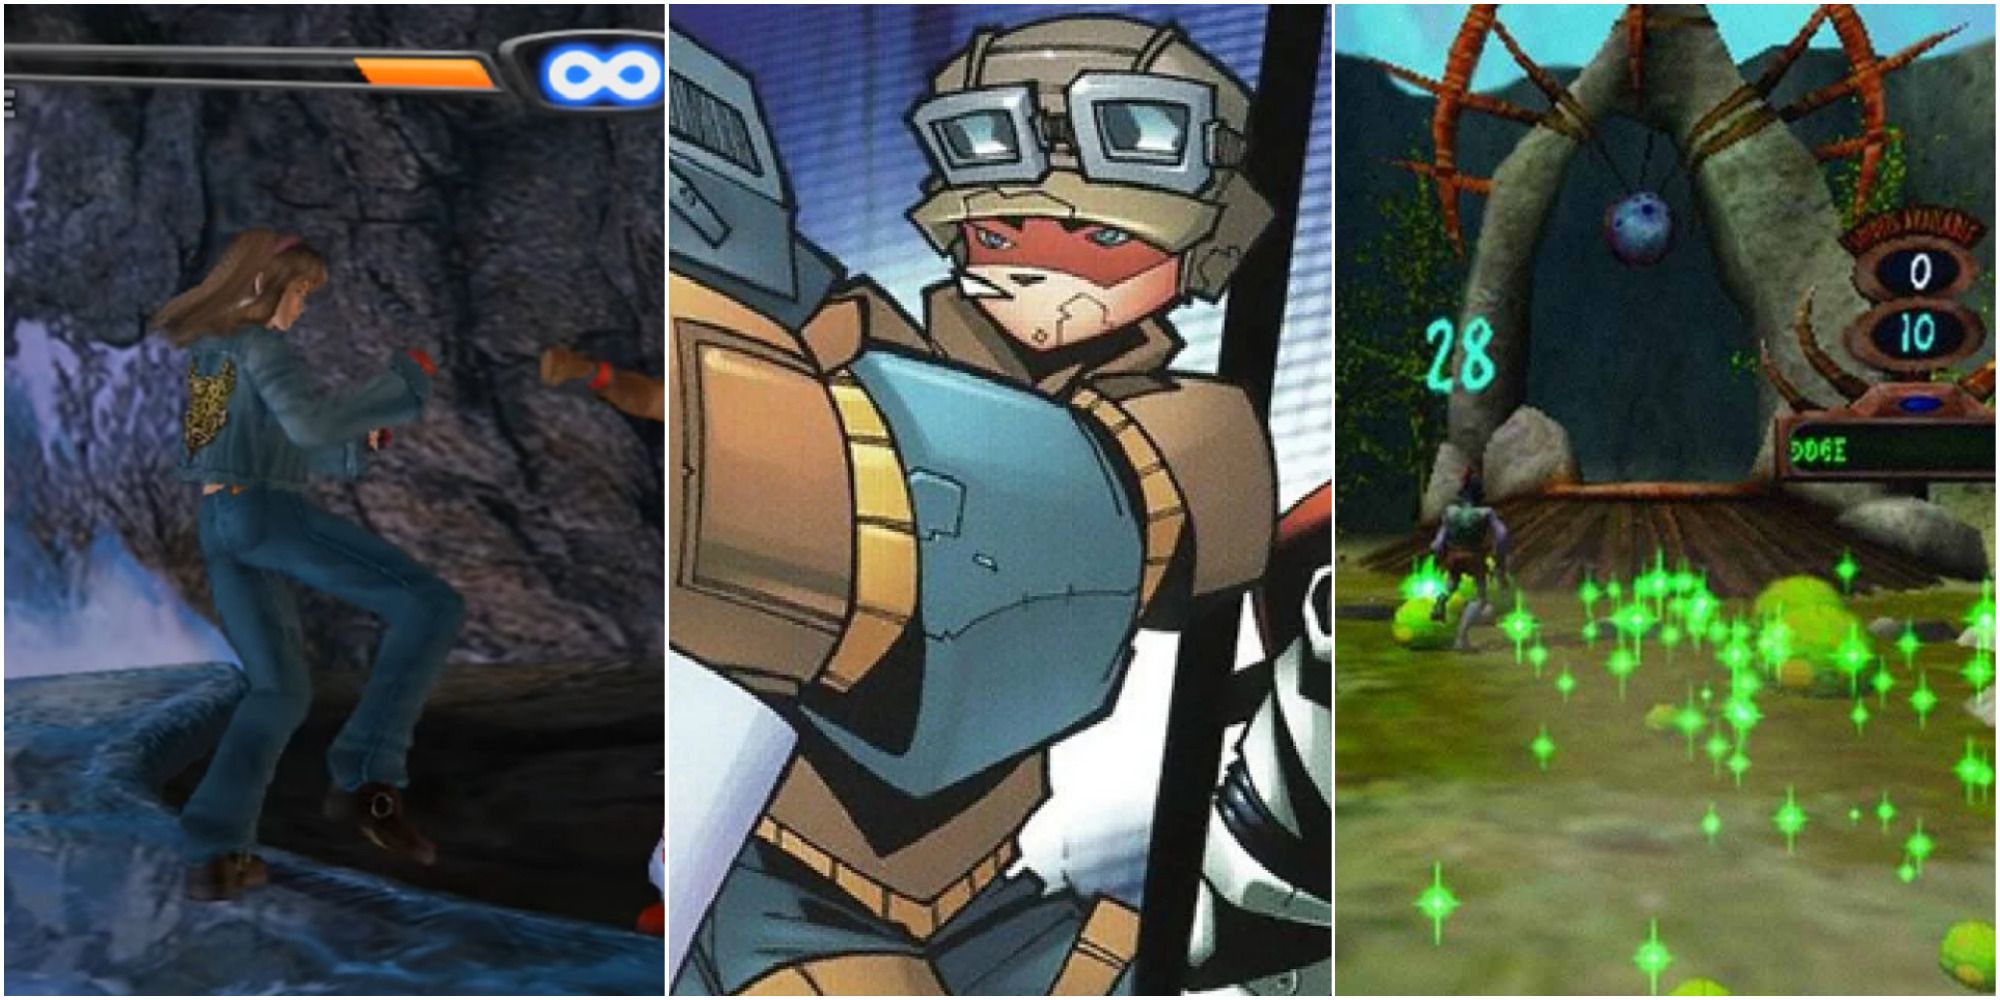 A collage of images from Dead Or Alive 3, TimeSplitters 2, and Oddworld: Munch's Oddysee